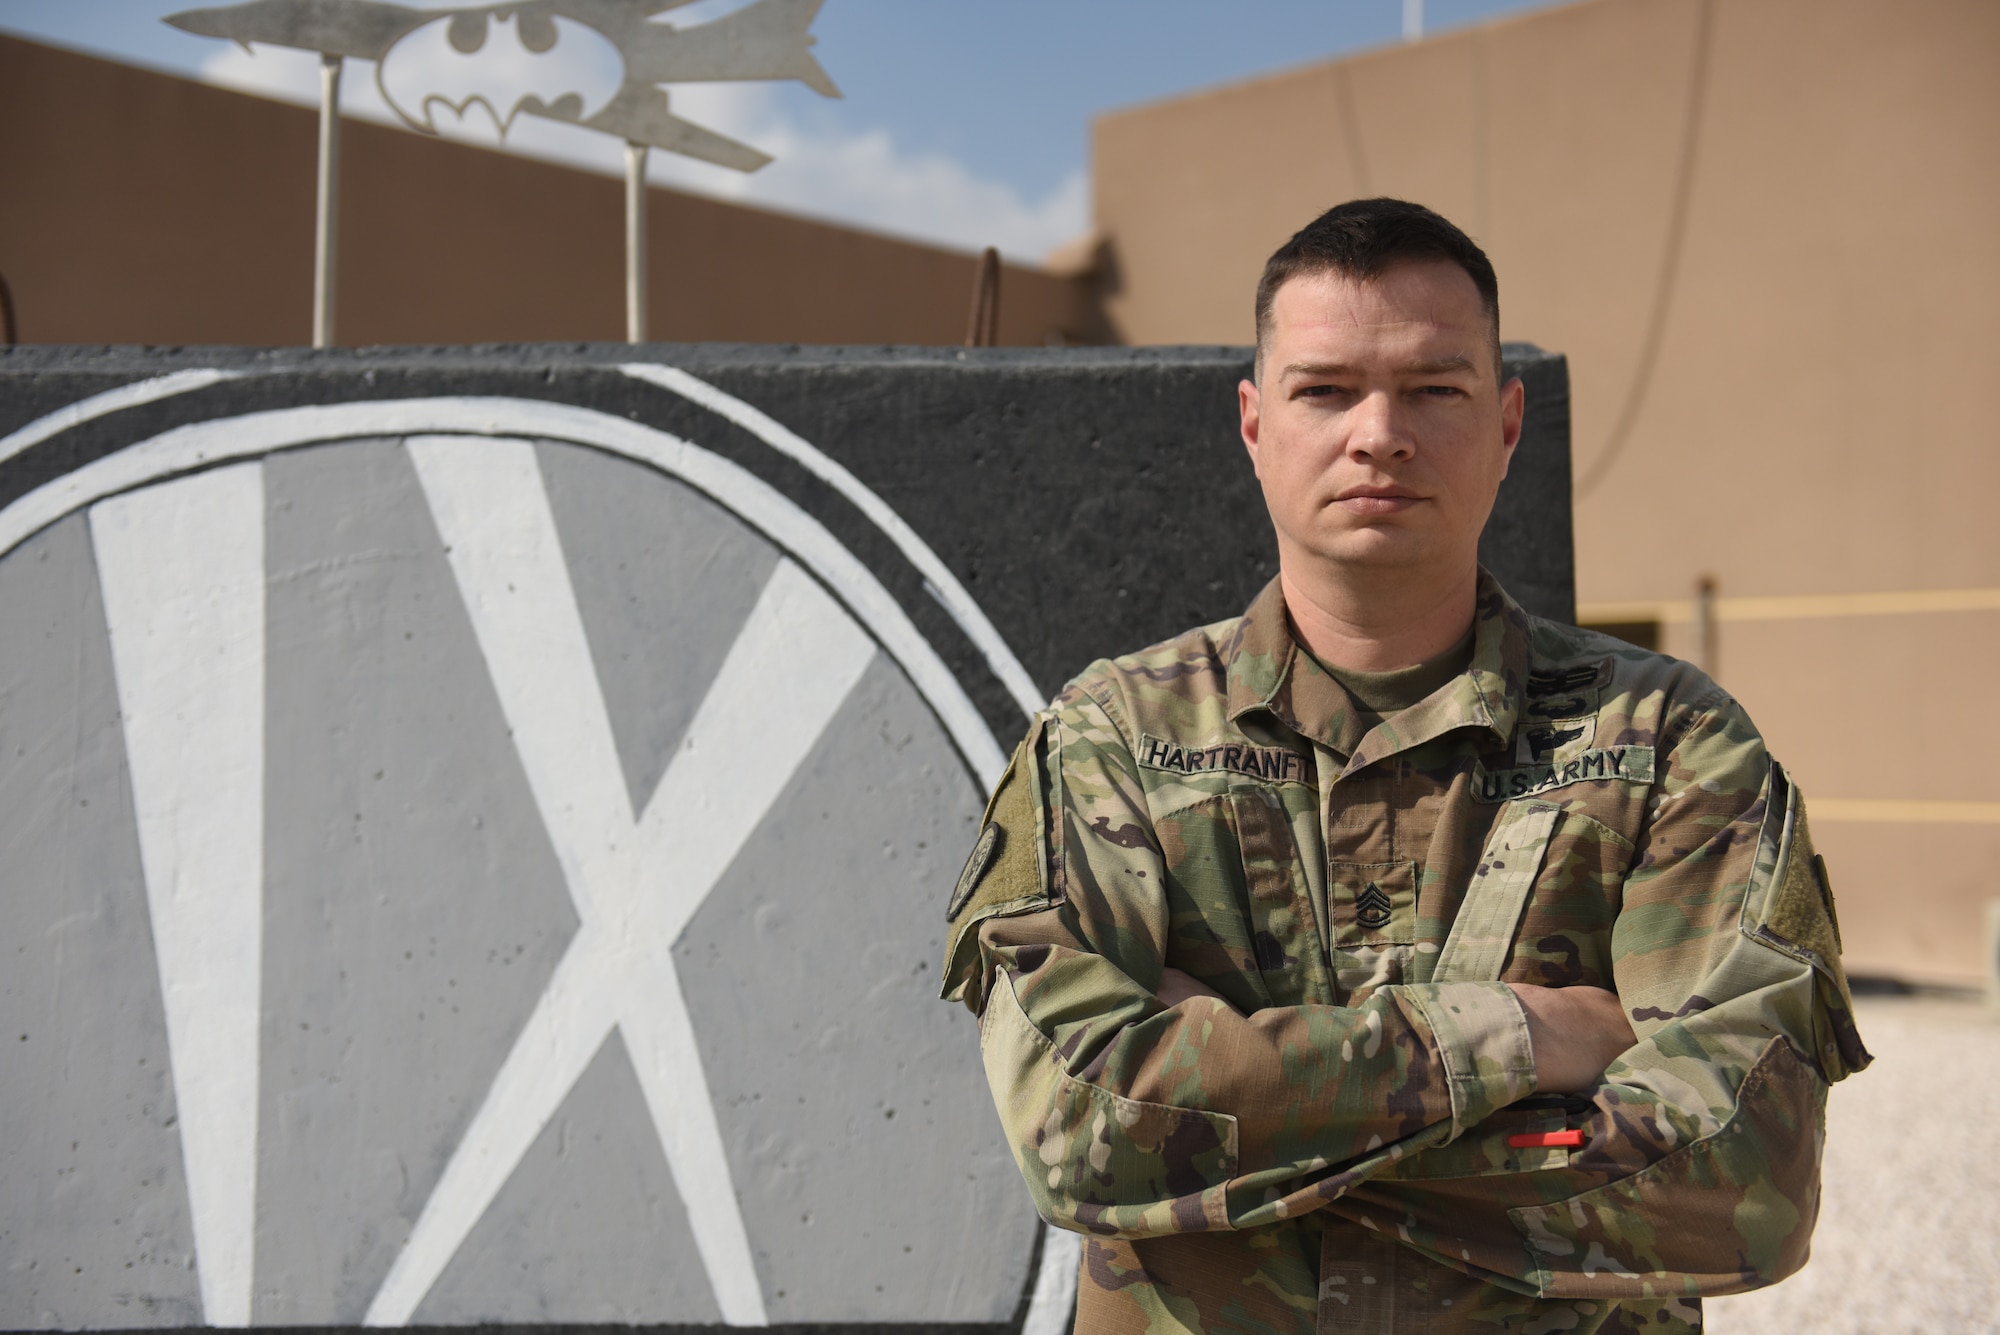 U.S. Army Sgt. 1st Class Timothy Hartranft, 9th Expeditionary Bomb Squadron ground liaison officer, stands in front of the 9th EBS T-Wall at Al Udeid Air Base, Qatar, Feb. 6, 2019. The GLO translates the ground units’ intent into action in the air, also known as green to blue. All GLOs within the U.S. Central Command area of responsibility are supplied by the 4th Battlefield Coordination Detachment which is a unit under U.S. Army Central. (U.S. Air Force photo by Senior Airman Travis Beihl)